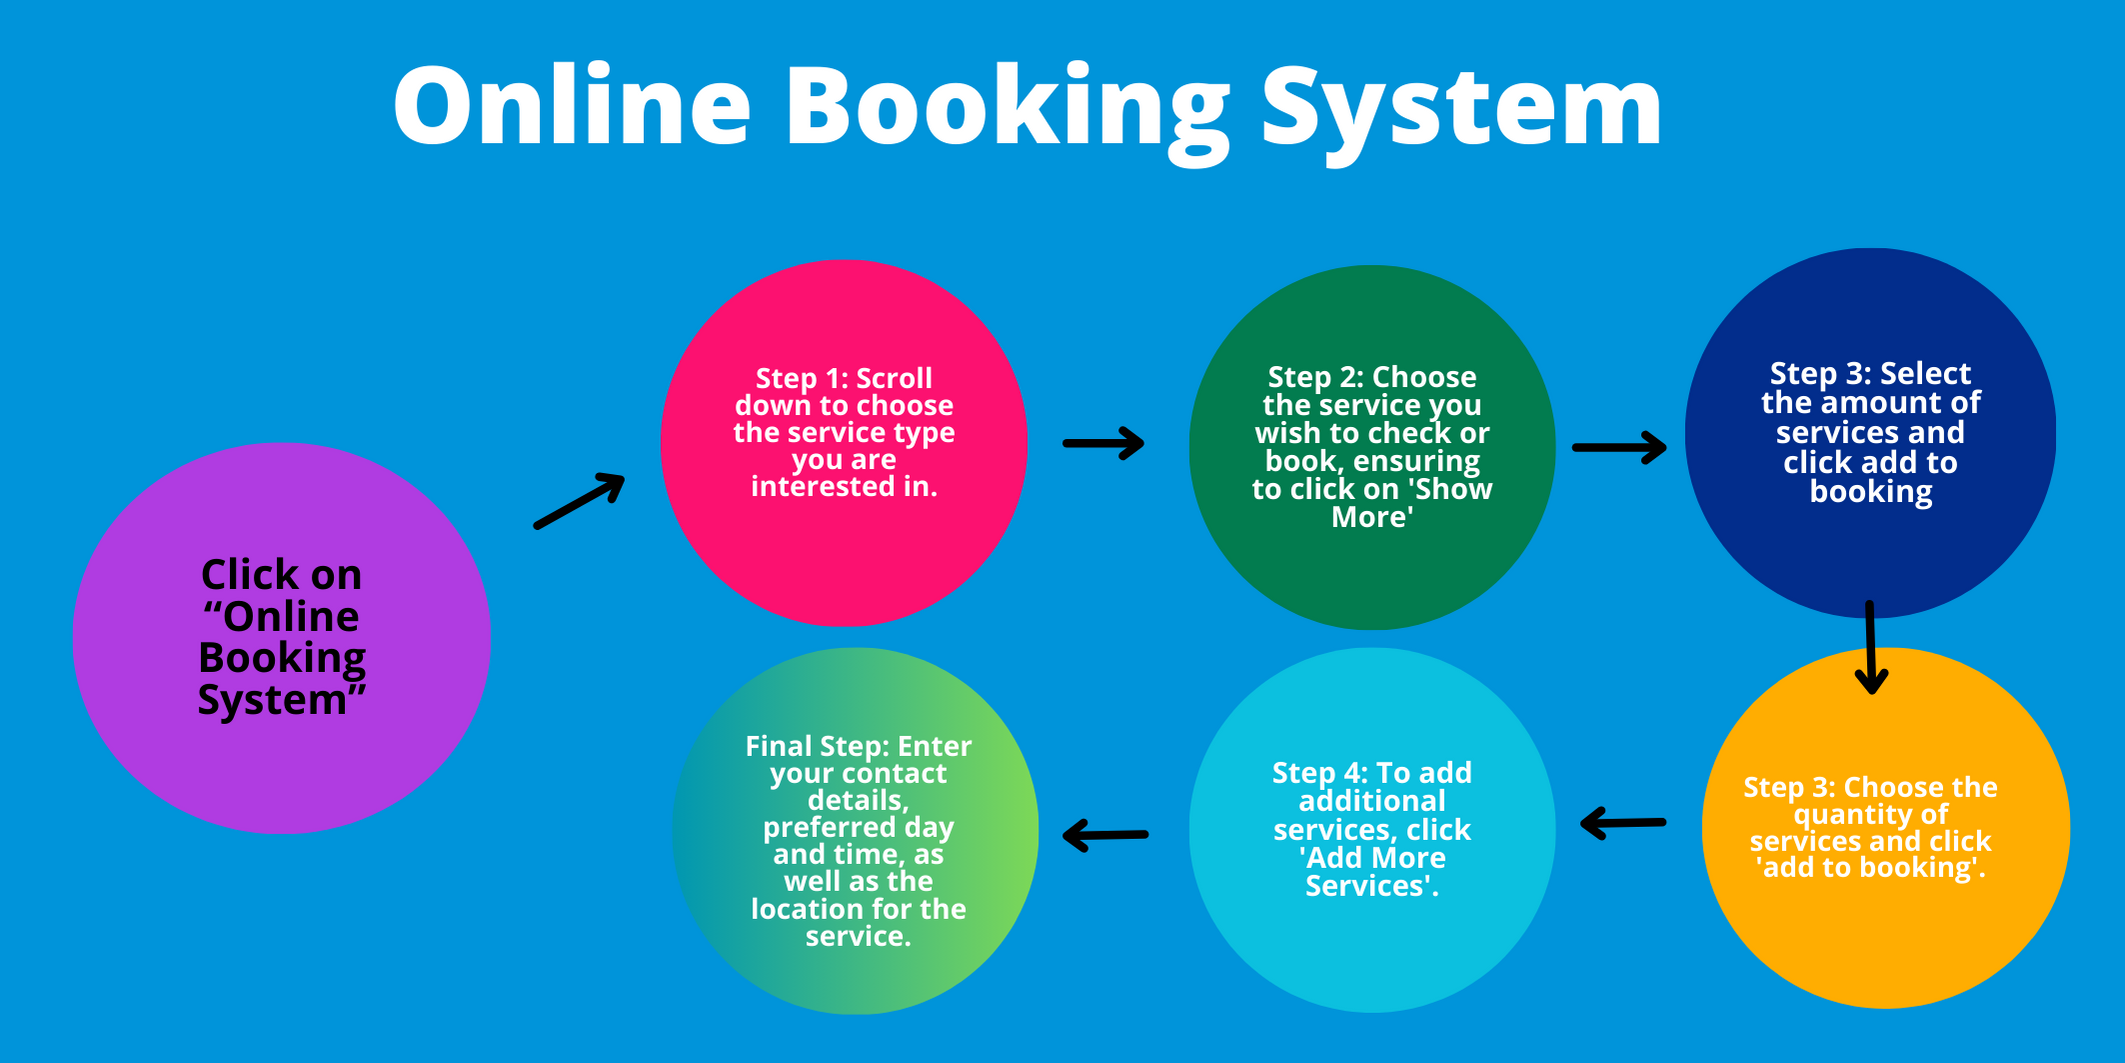 How our Online Booking System works